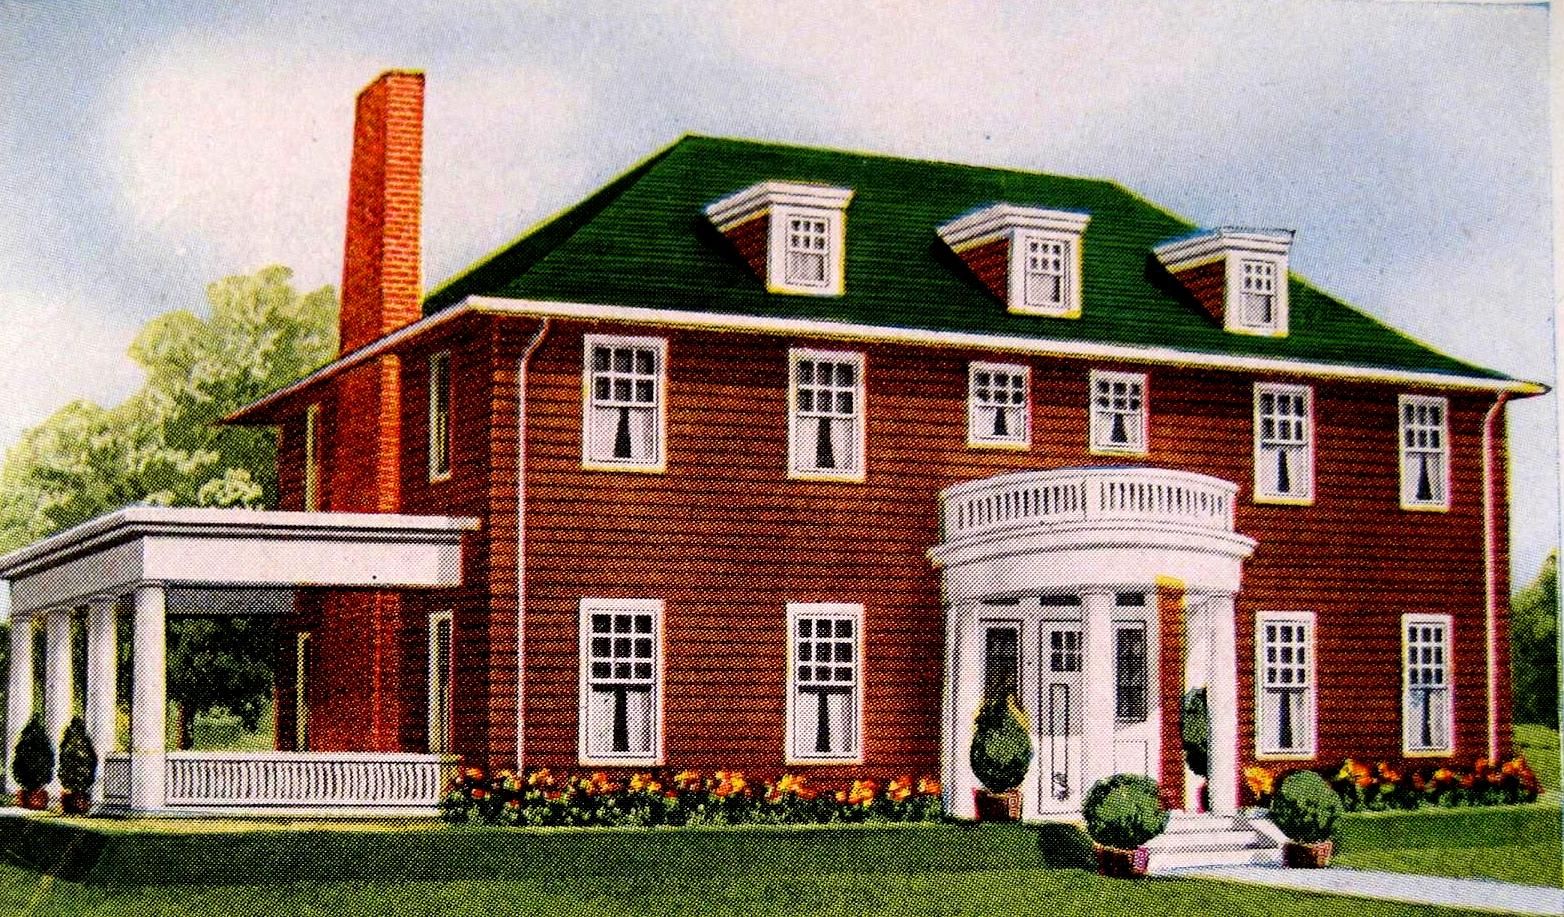 As mentioned, in addition to Sears, there as also a mail-order company called Aladdin. This is an Aladdin Colonial, which was Aladdins biggest and fanciest house.